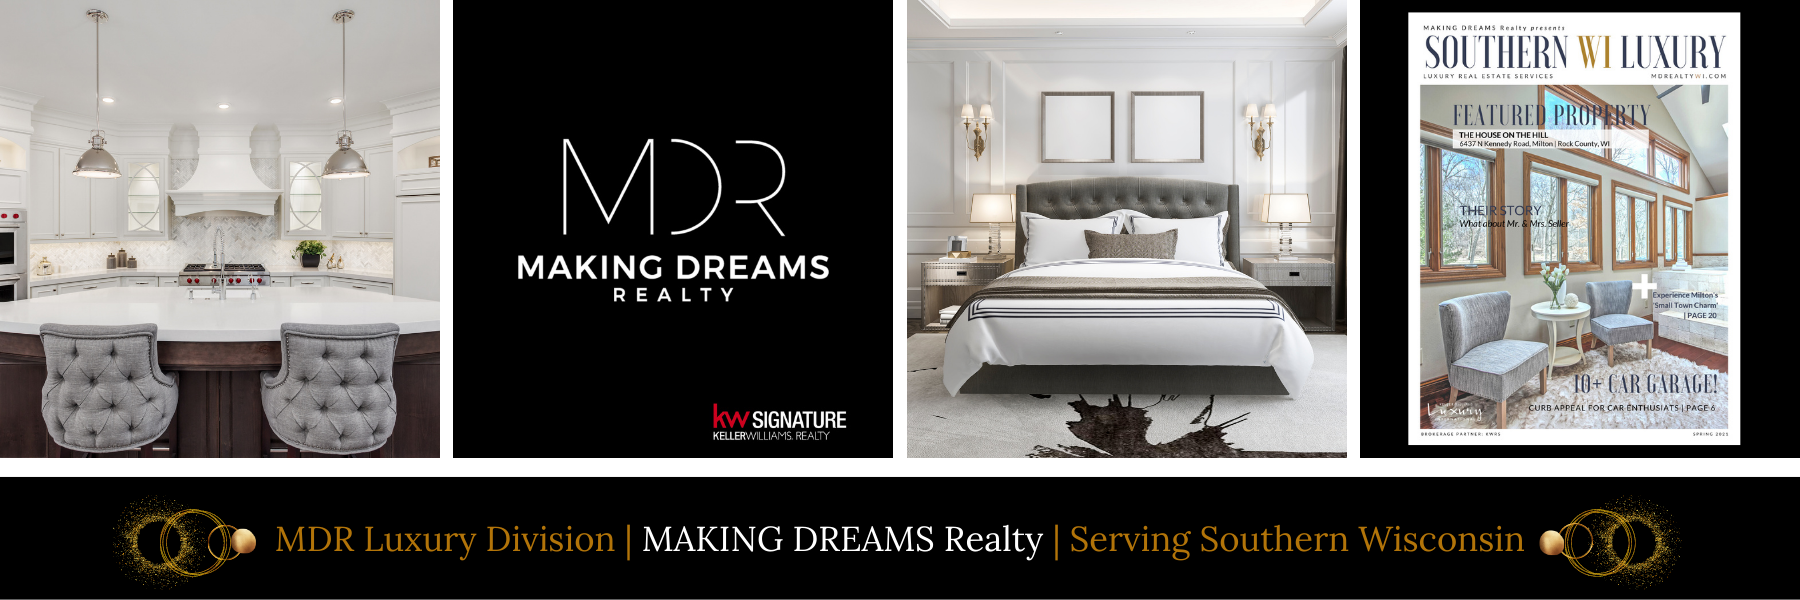 Find luxury properties for sale in Southern Wisconsin with MAKING DREAMS Realty